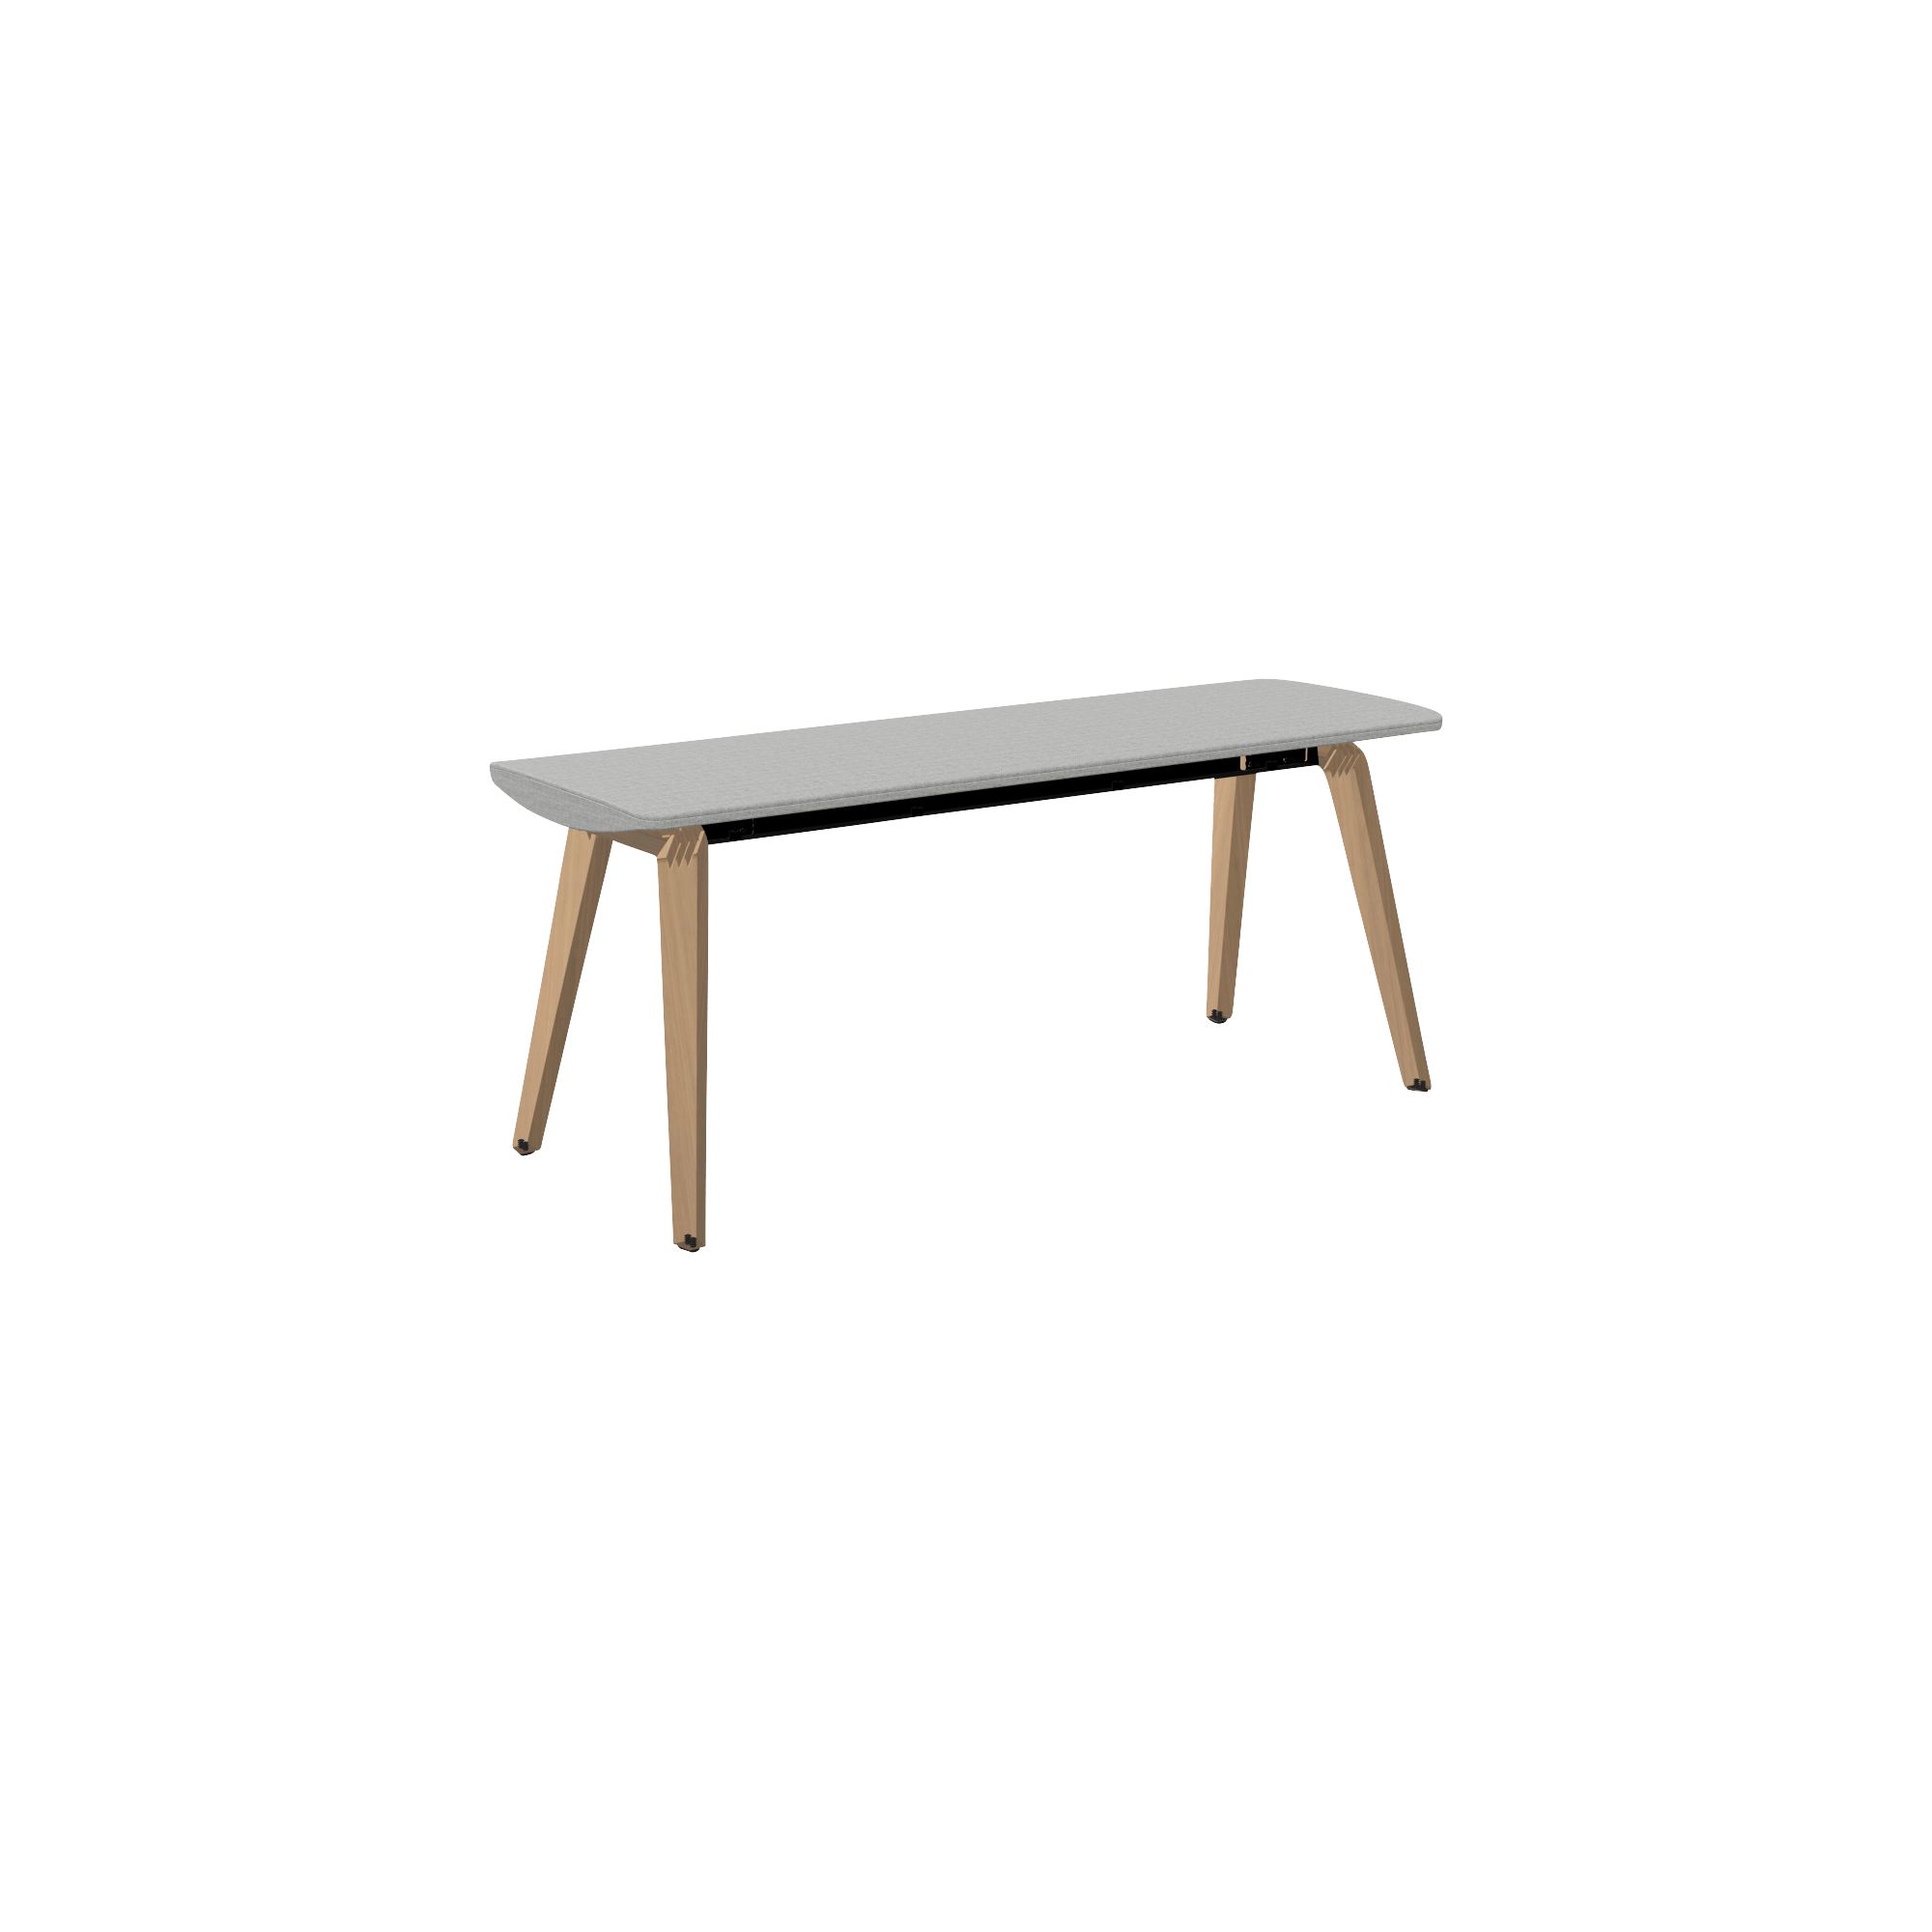 A grey and wooden bench